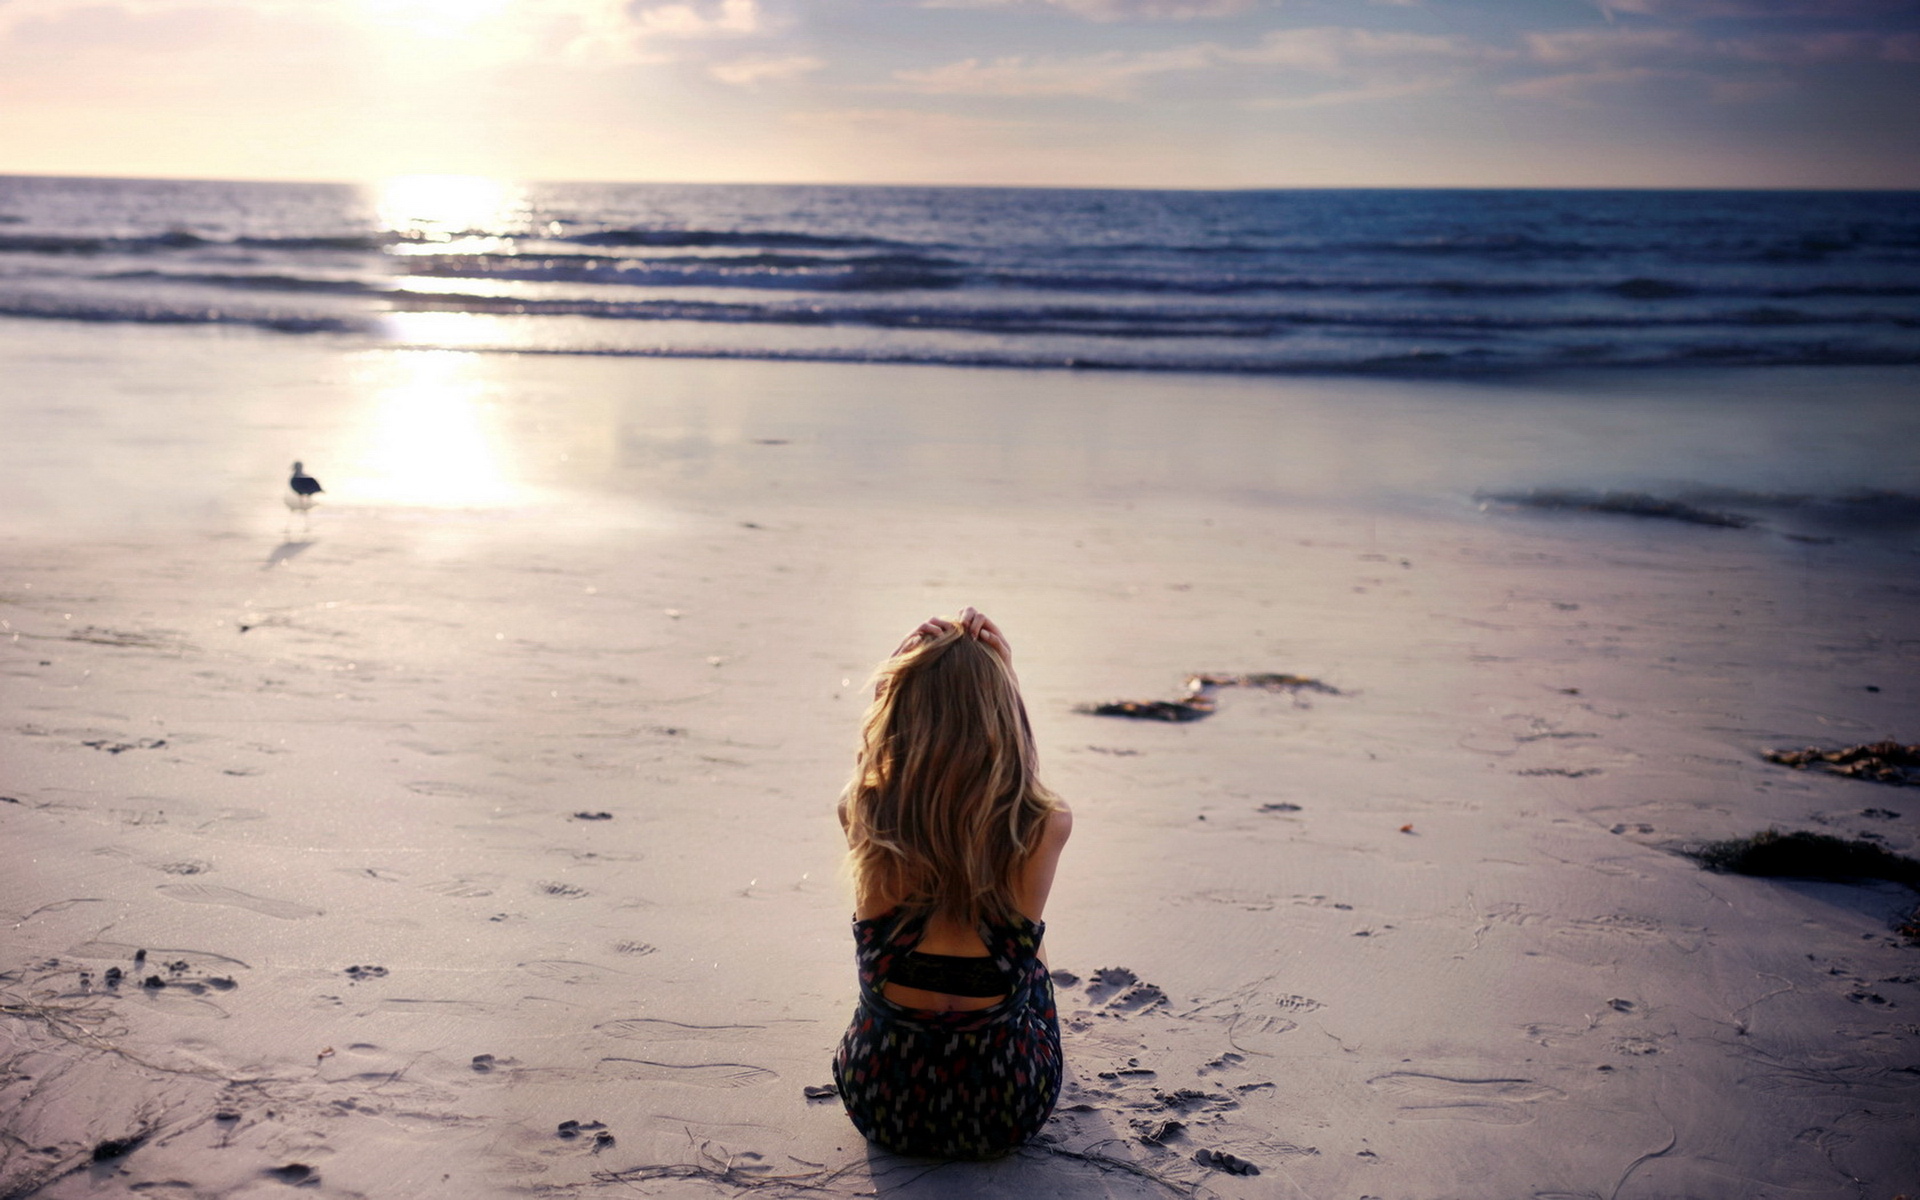 Sad Images Alone Girl Wallpapers, Pictures - Sitting At The Beach - HD Wallpaper 